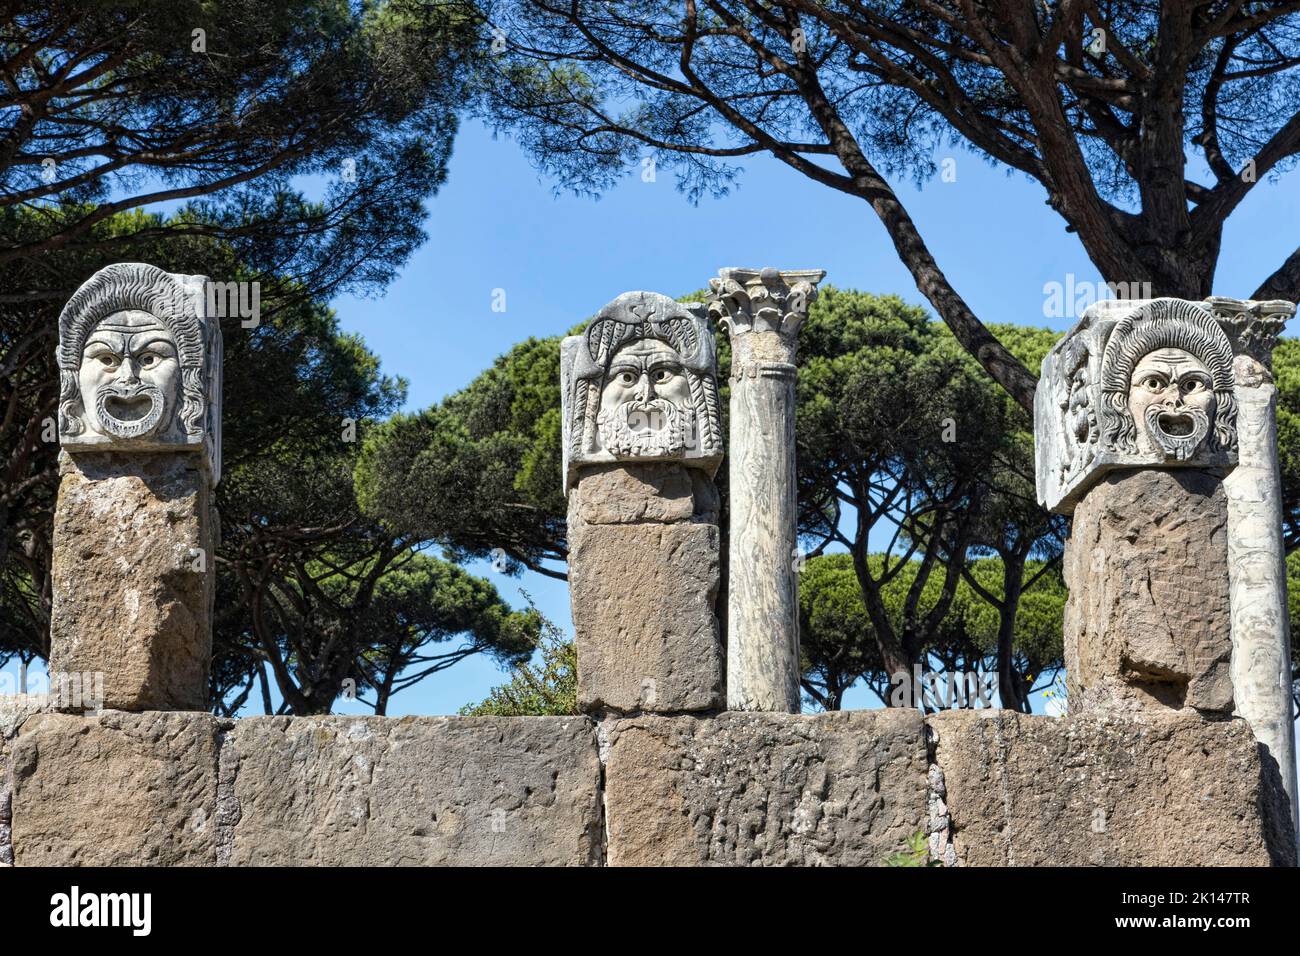 Ancient roman artworks  three sculpted ornamental theatrical masks that were originally part of the decoration of the Roman theater of Ostia Antica, R Stock Photo